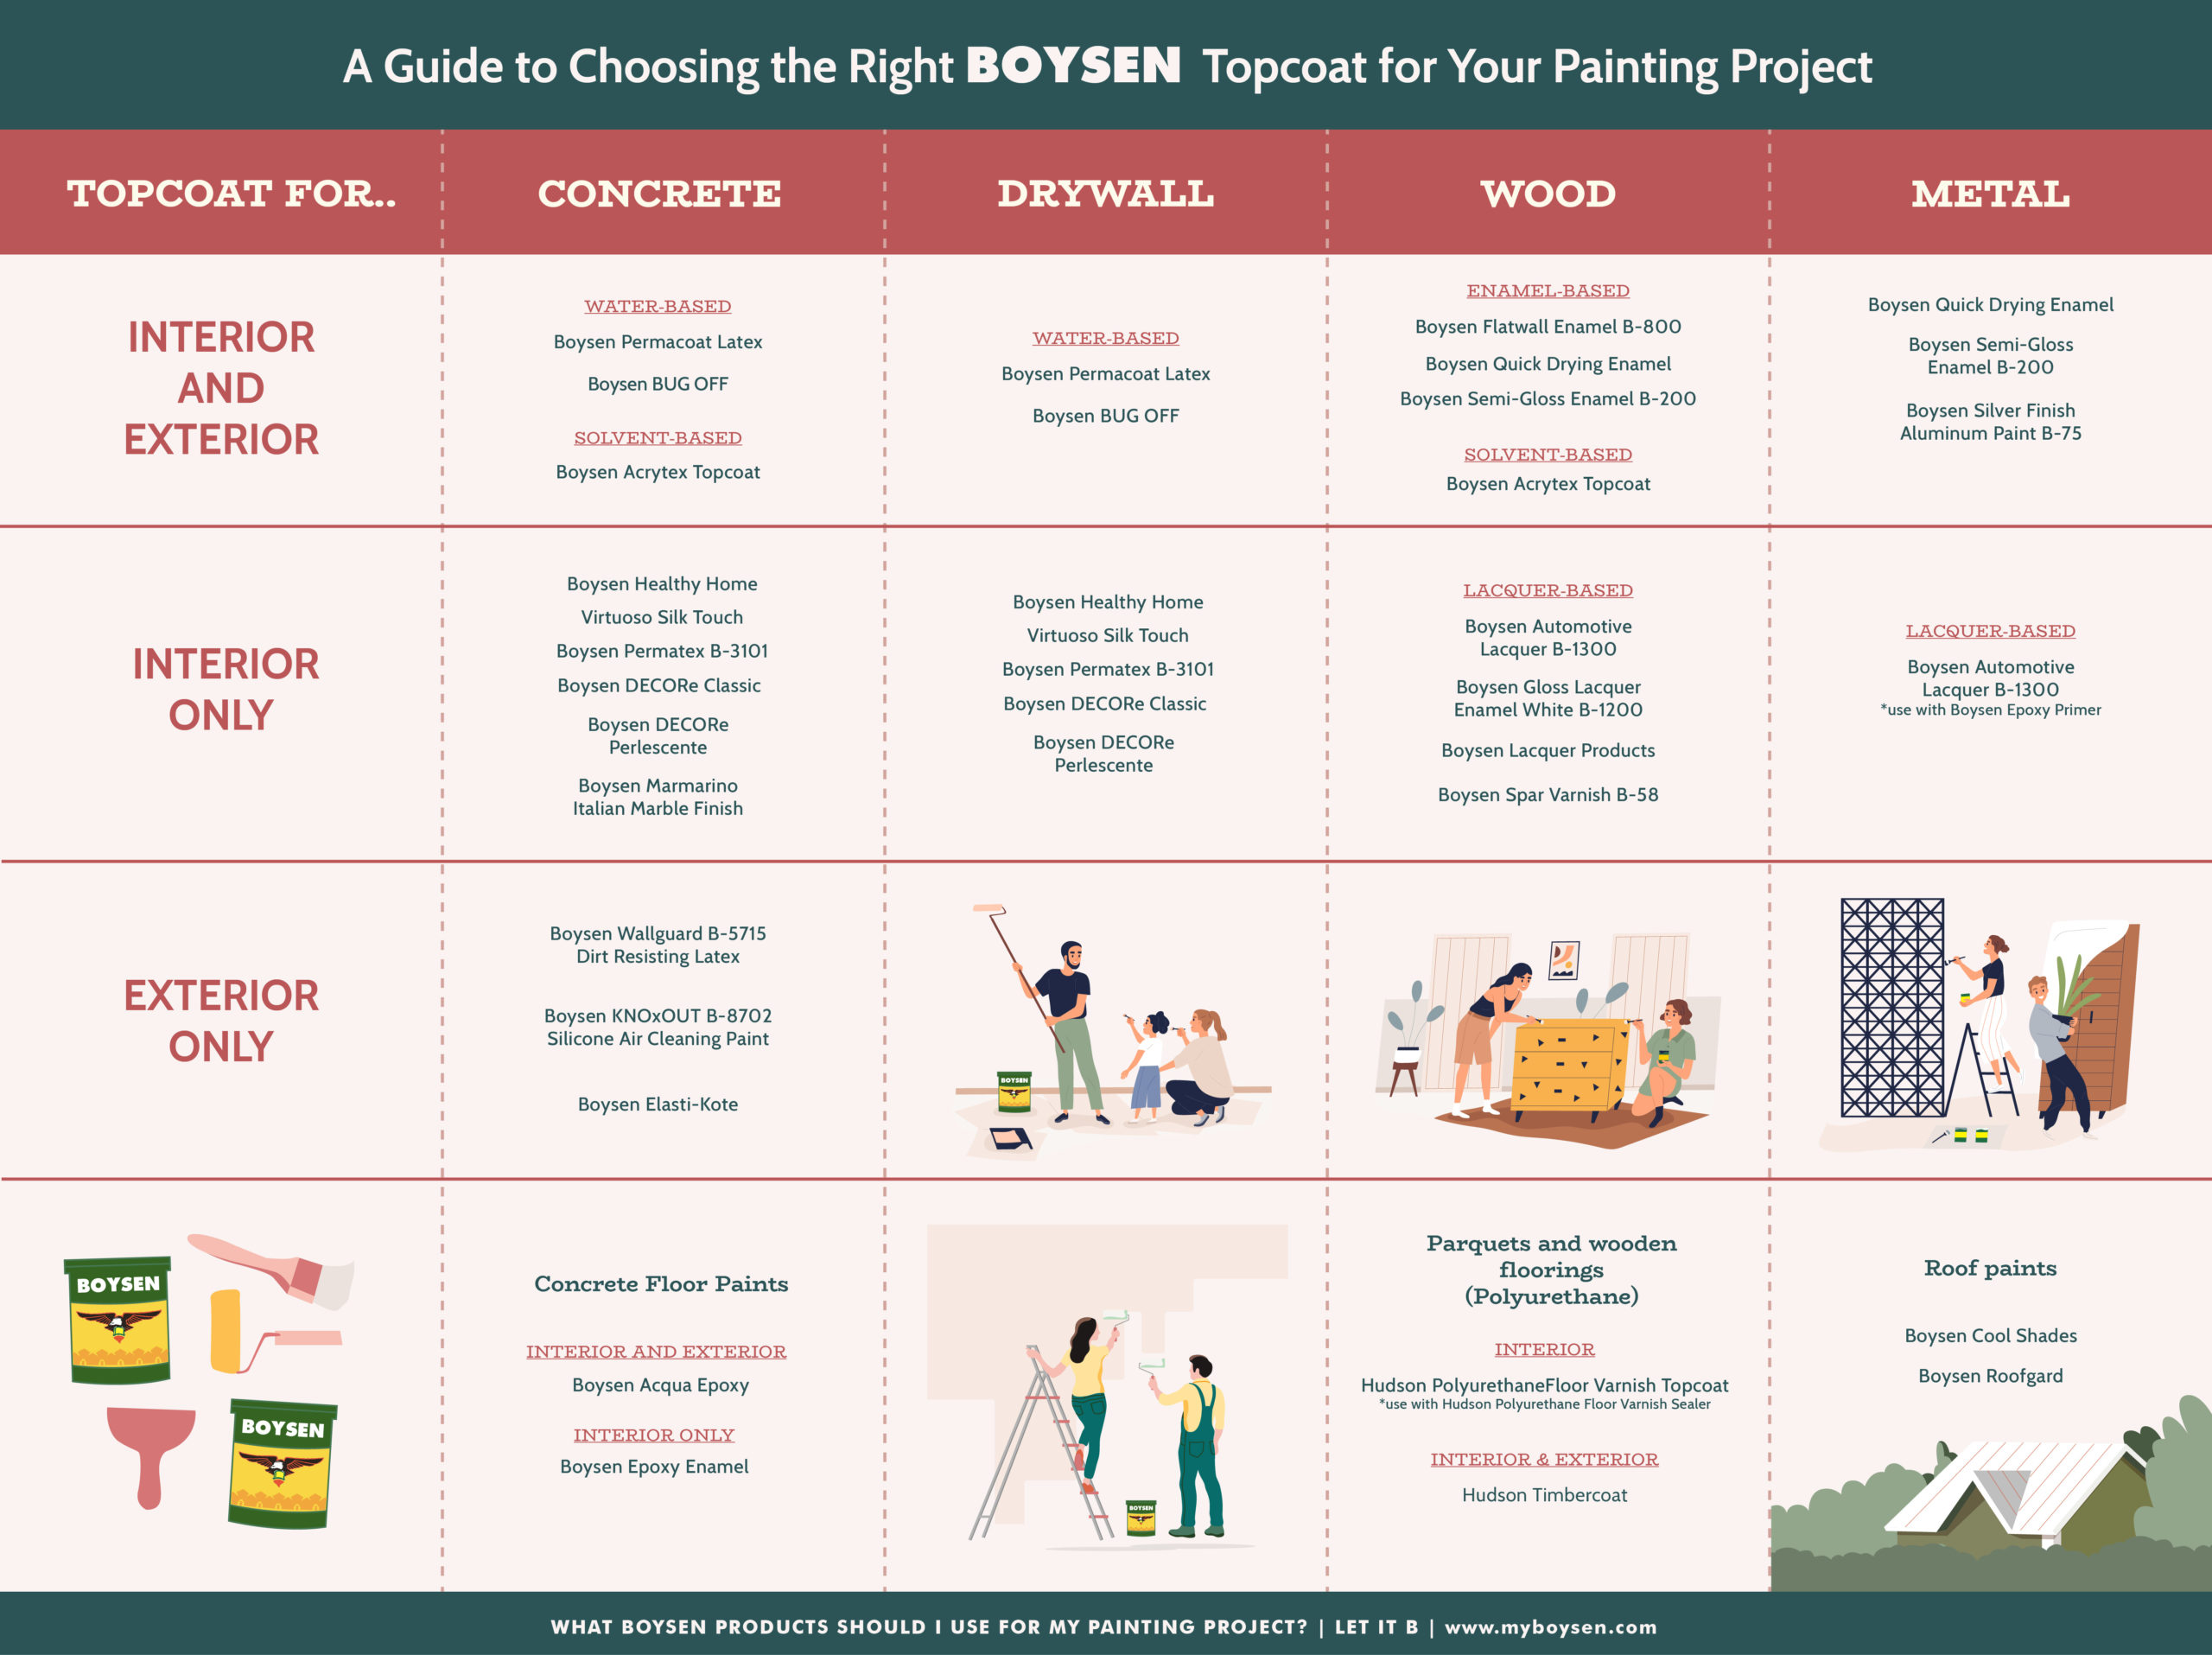 What Boysen Products Should I Use for My Painting Project? | MyBoysen